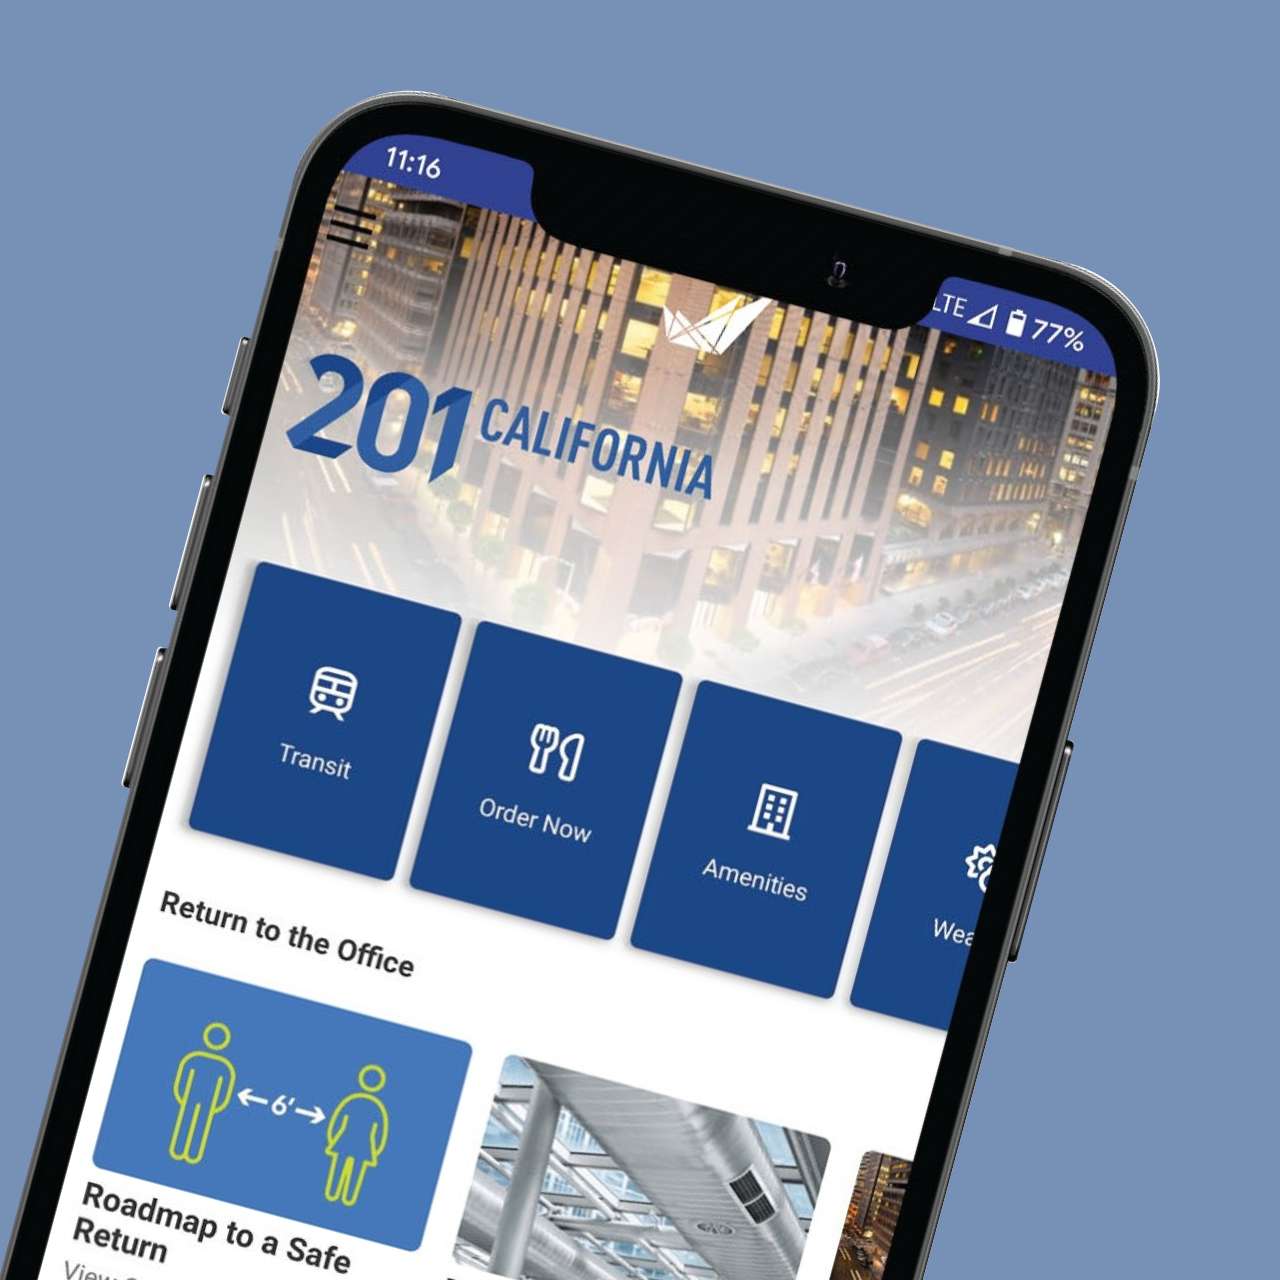 NEW BUILDING MOBILE APP, 
EXCLUSIVELY FOR 201 CALIFORNIA image